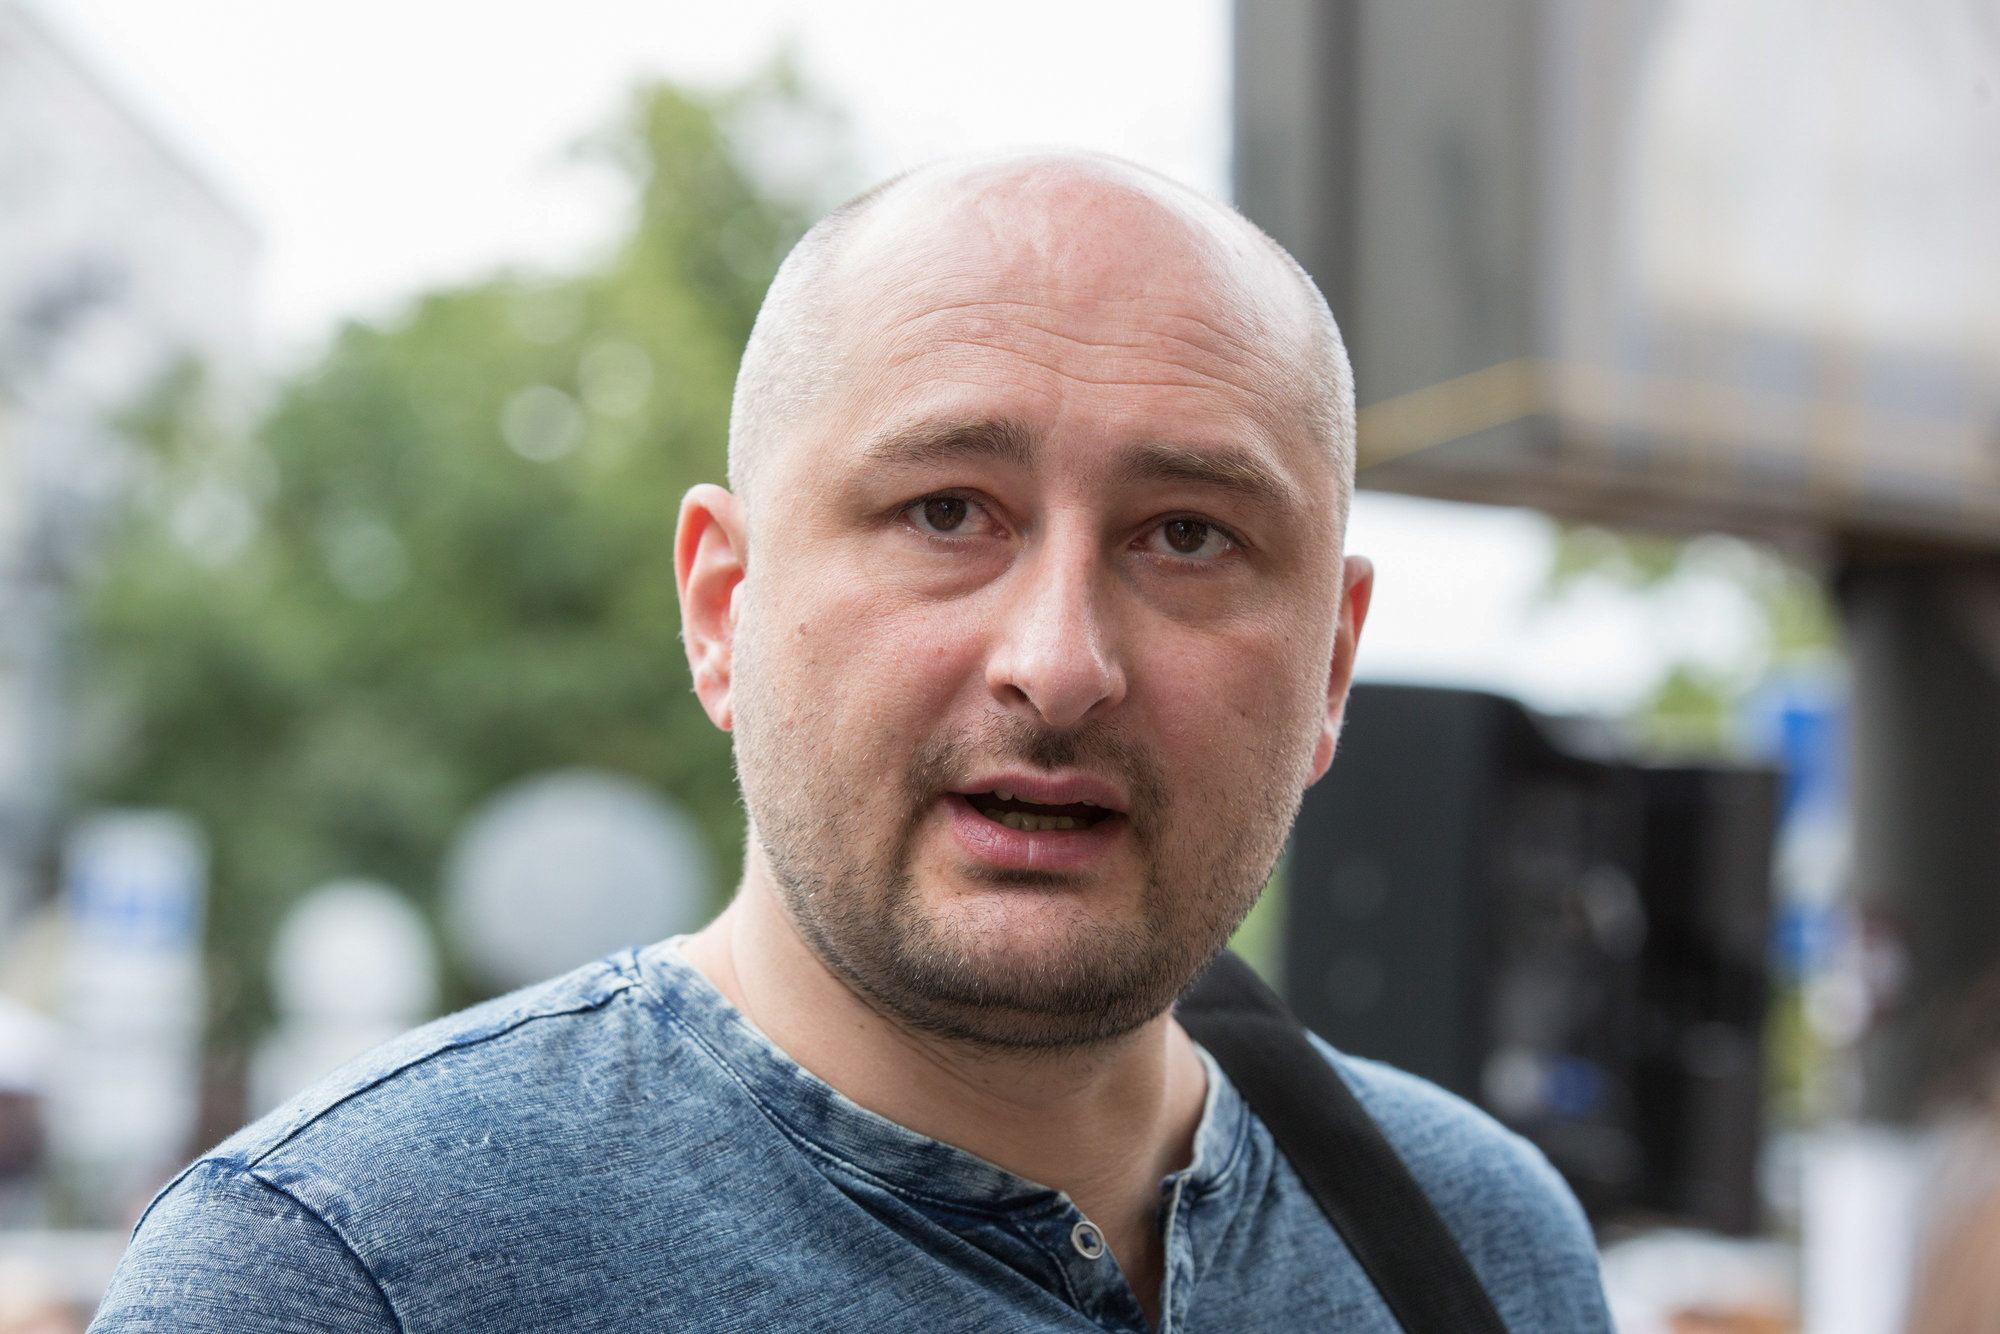 epa06771910 A picture made available on 29 May 2018 shows Russian opposition journalist Arkady Babchenko take part in action to commemorate killed Belarus-born Russian journalist Pavel Sheremet in Kiev, Ukraine, 20 July 2017. Russian opposition journalist Arkadiy Babchenko, who lived in Ukraine, was shot on 29 May 2018 in his Kiev home by three shots to his back and died from his wounds on the way to hospital, local media report. Babchenko was criticizing Russian authorities and writing about arrests of Crimean-Tatarian journalists in the Crimea after annexation of it by Russia.  EPA/INNA SOKOLOVSKA